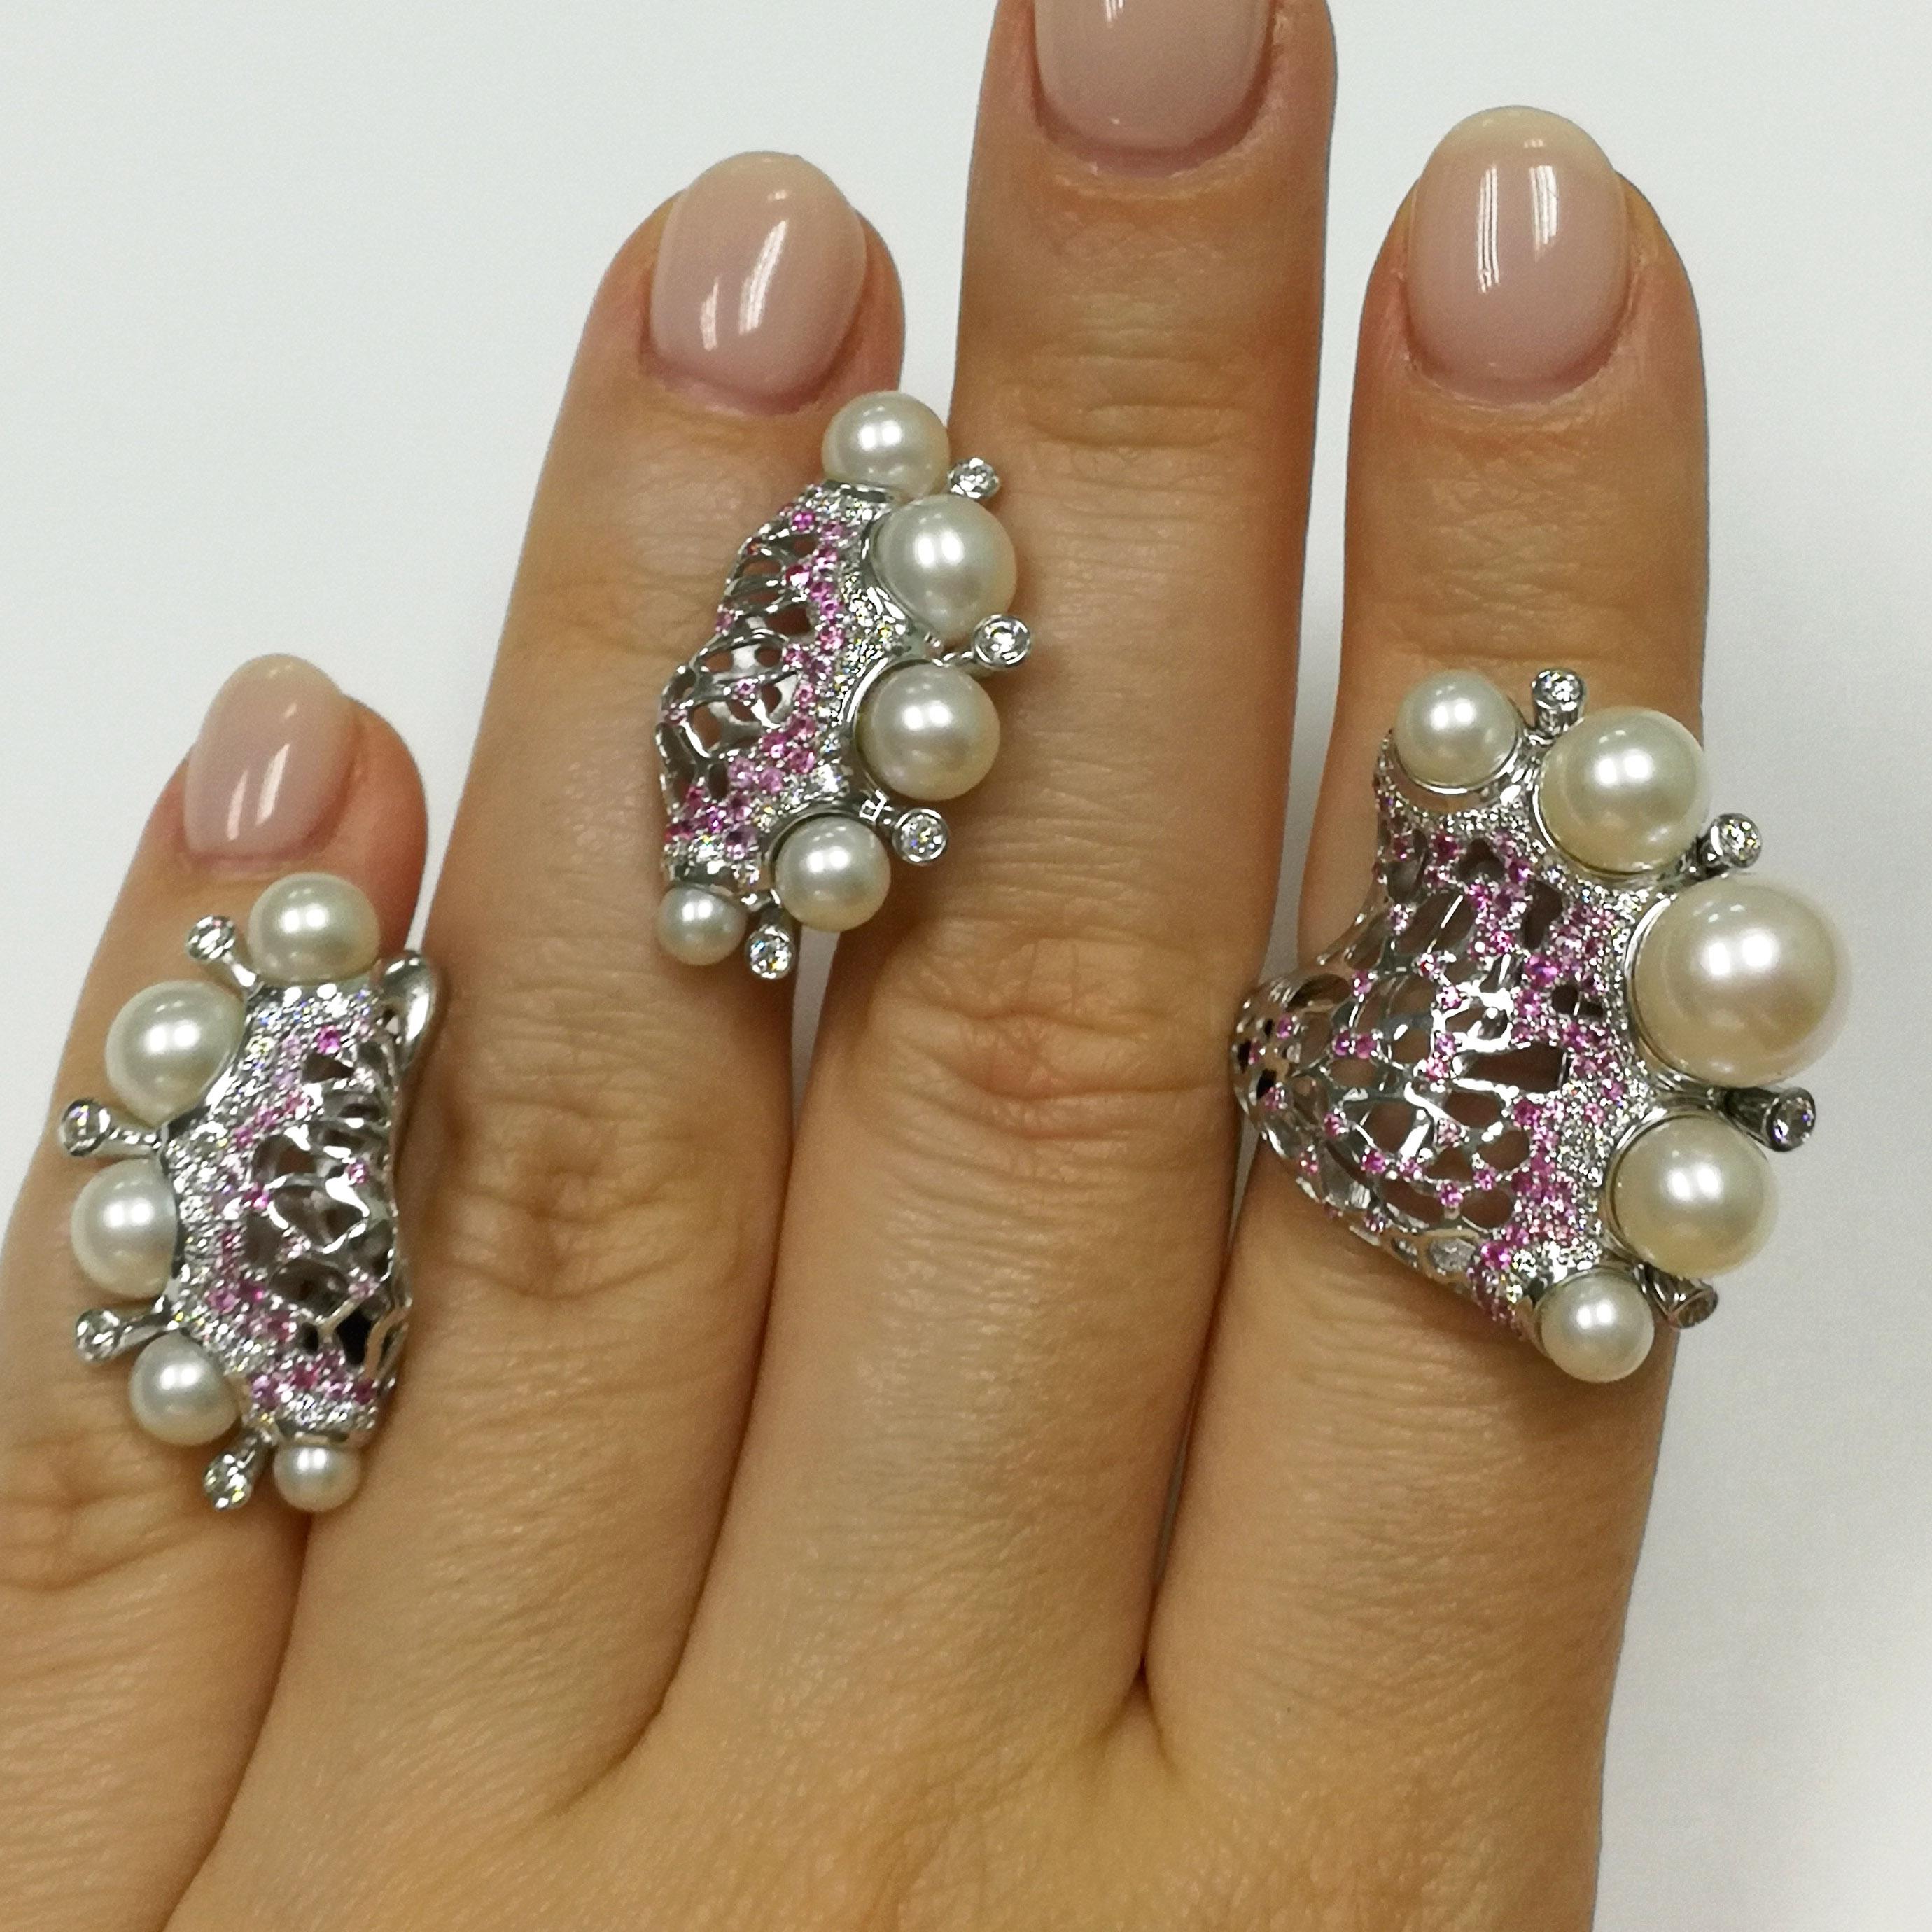 Pearls Diamonds Pink Sapphires 18 Karat White Gold Coral Reef Suite
Suite from Coral Reef Collection continues the marine theme. It resembles both coral and sea waves, as in the engraving by Katsushika Hokusai 